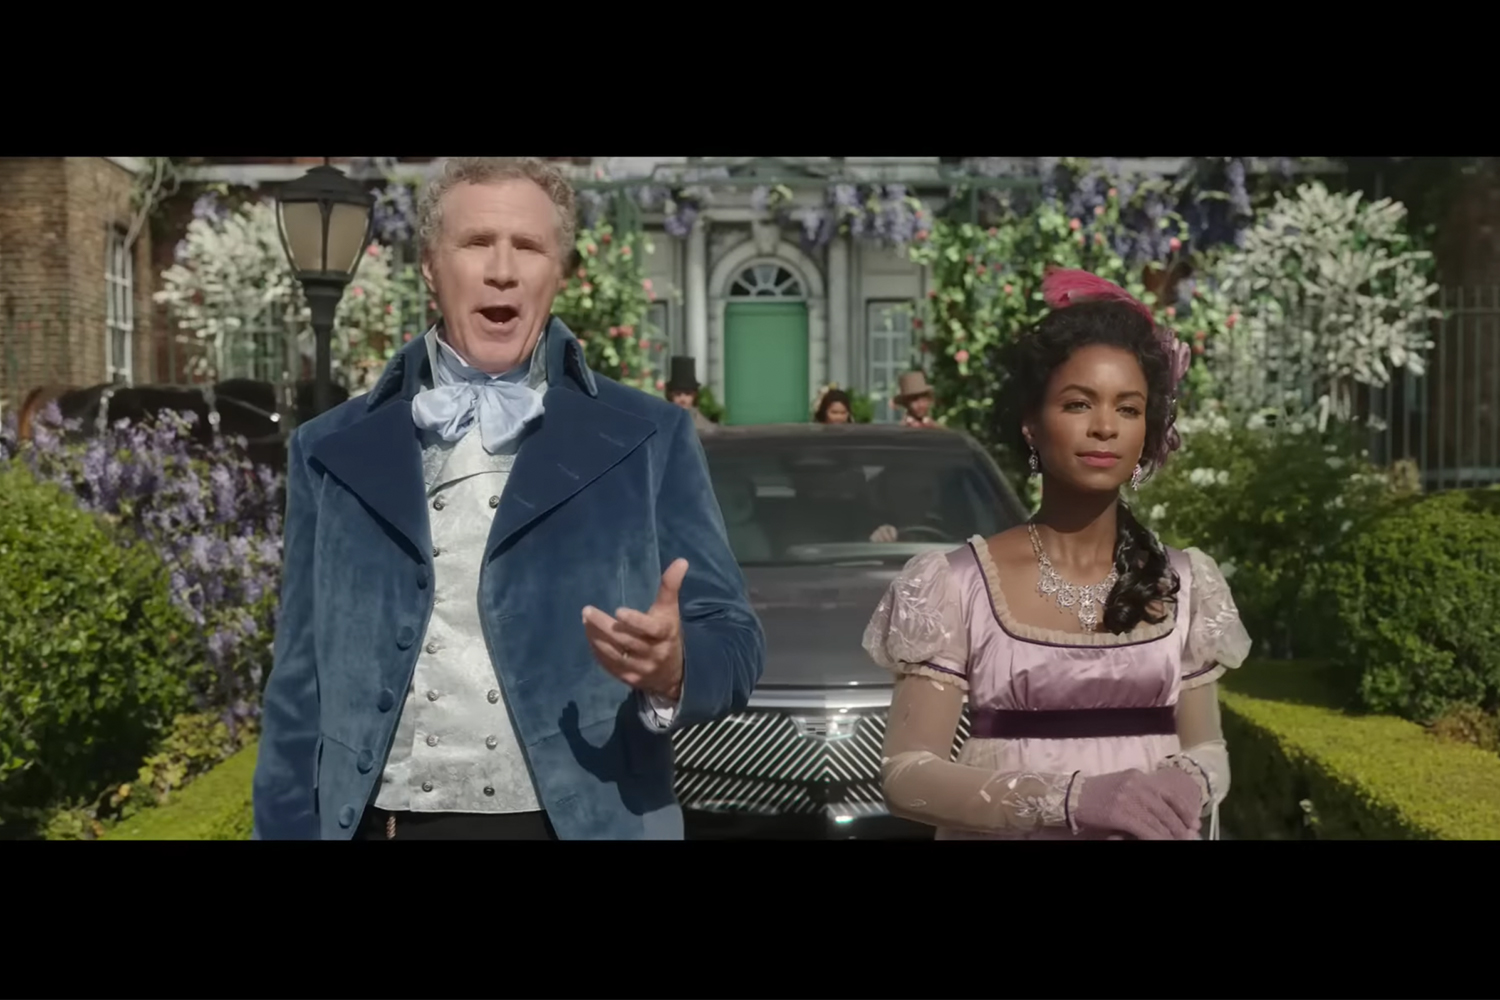 Will Ferrell walks in front of a Cadillac Lyriq in a scene inspired by "Bridgerton"